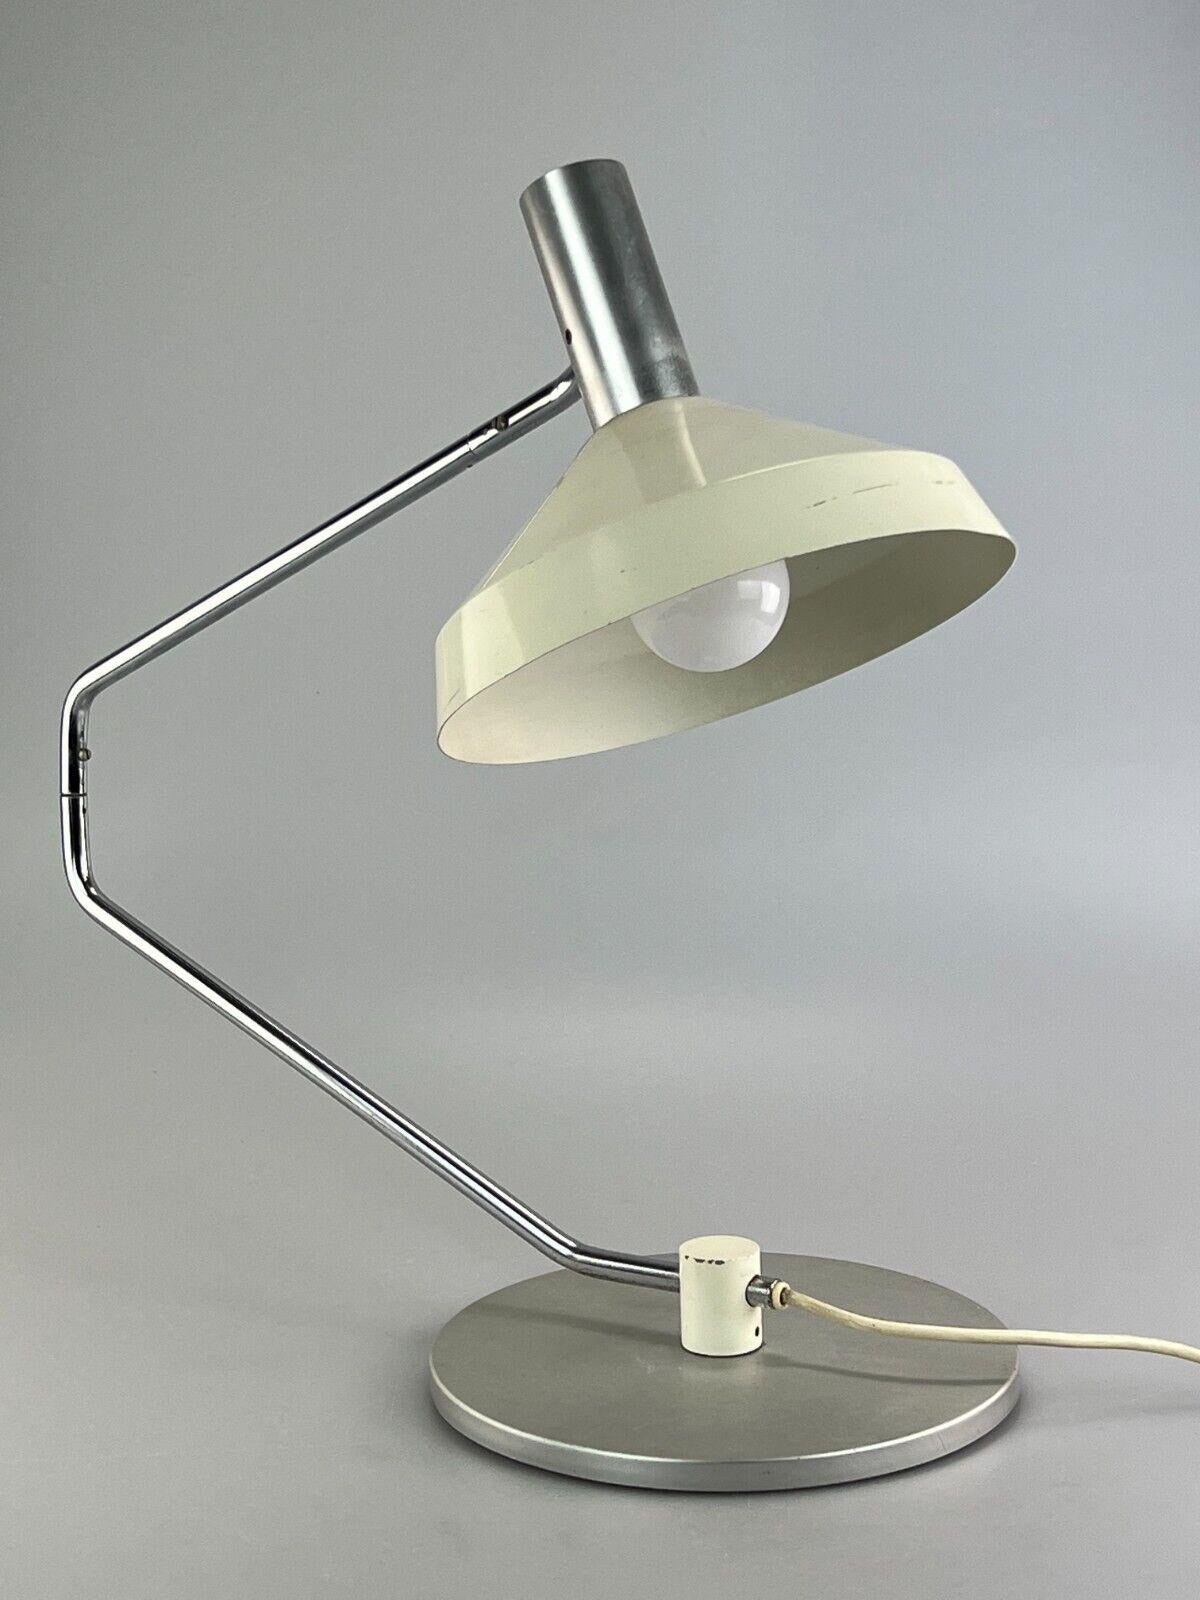 60s 70s table lamp Rosemarie and Rico Baltensweiler for Baltensweiler

Object: desk lamp

Manufacturer: Baltensweiler

Condition: good - vintage

Age: around 1960-1970

Dimensions:

50cm x 23.5cm x 47cm

Other notes:

The pictures serve as part of